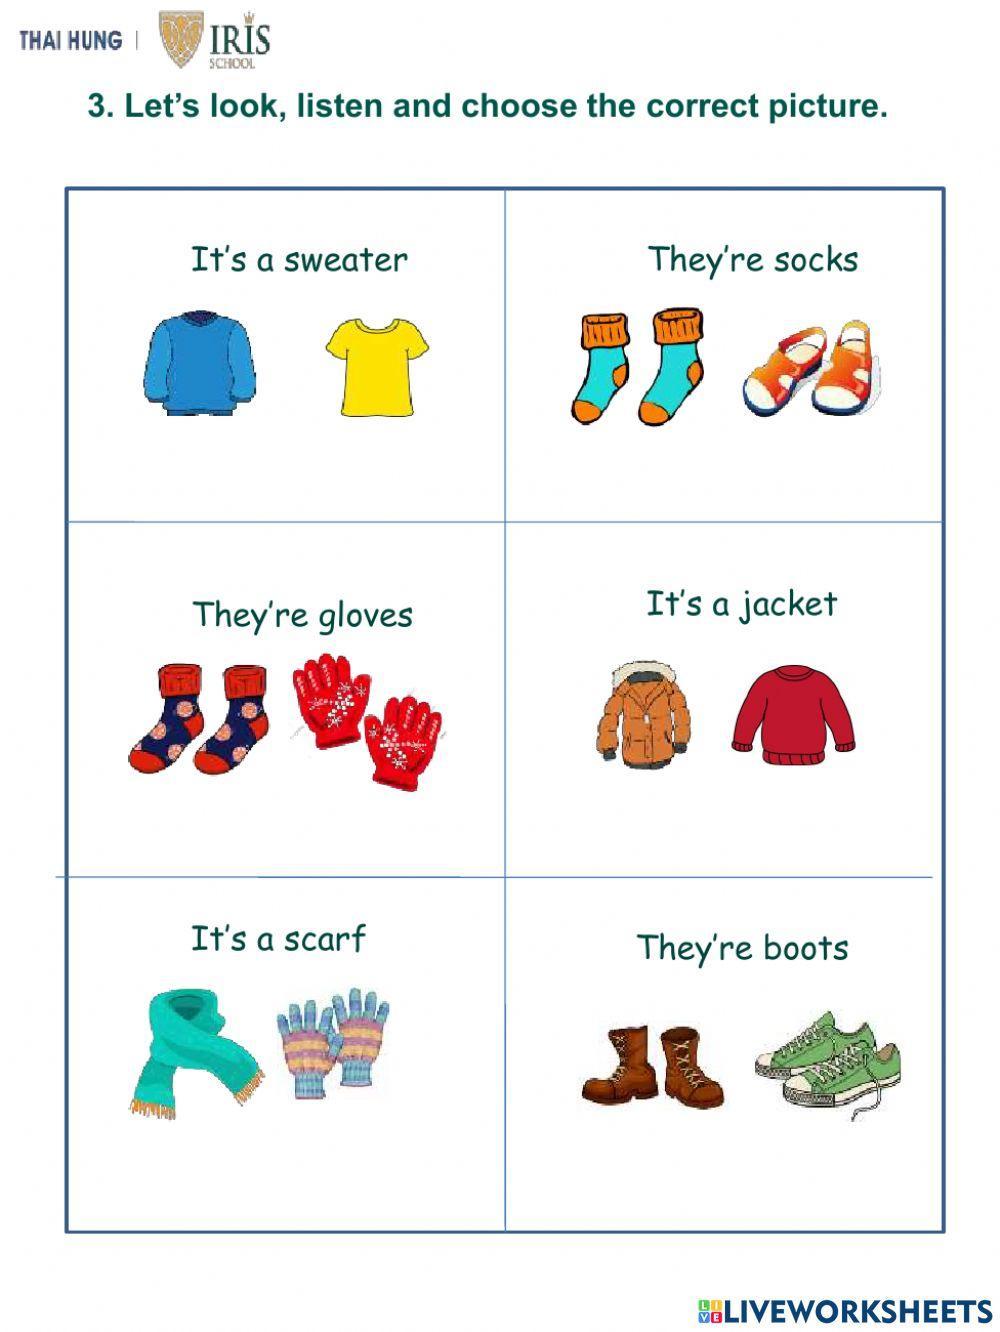 Moon-Worksheet about Winter Clothes